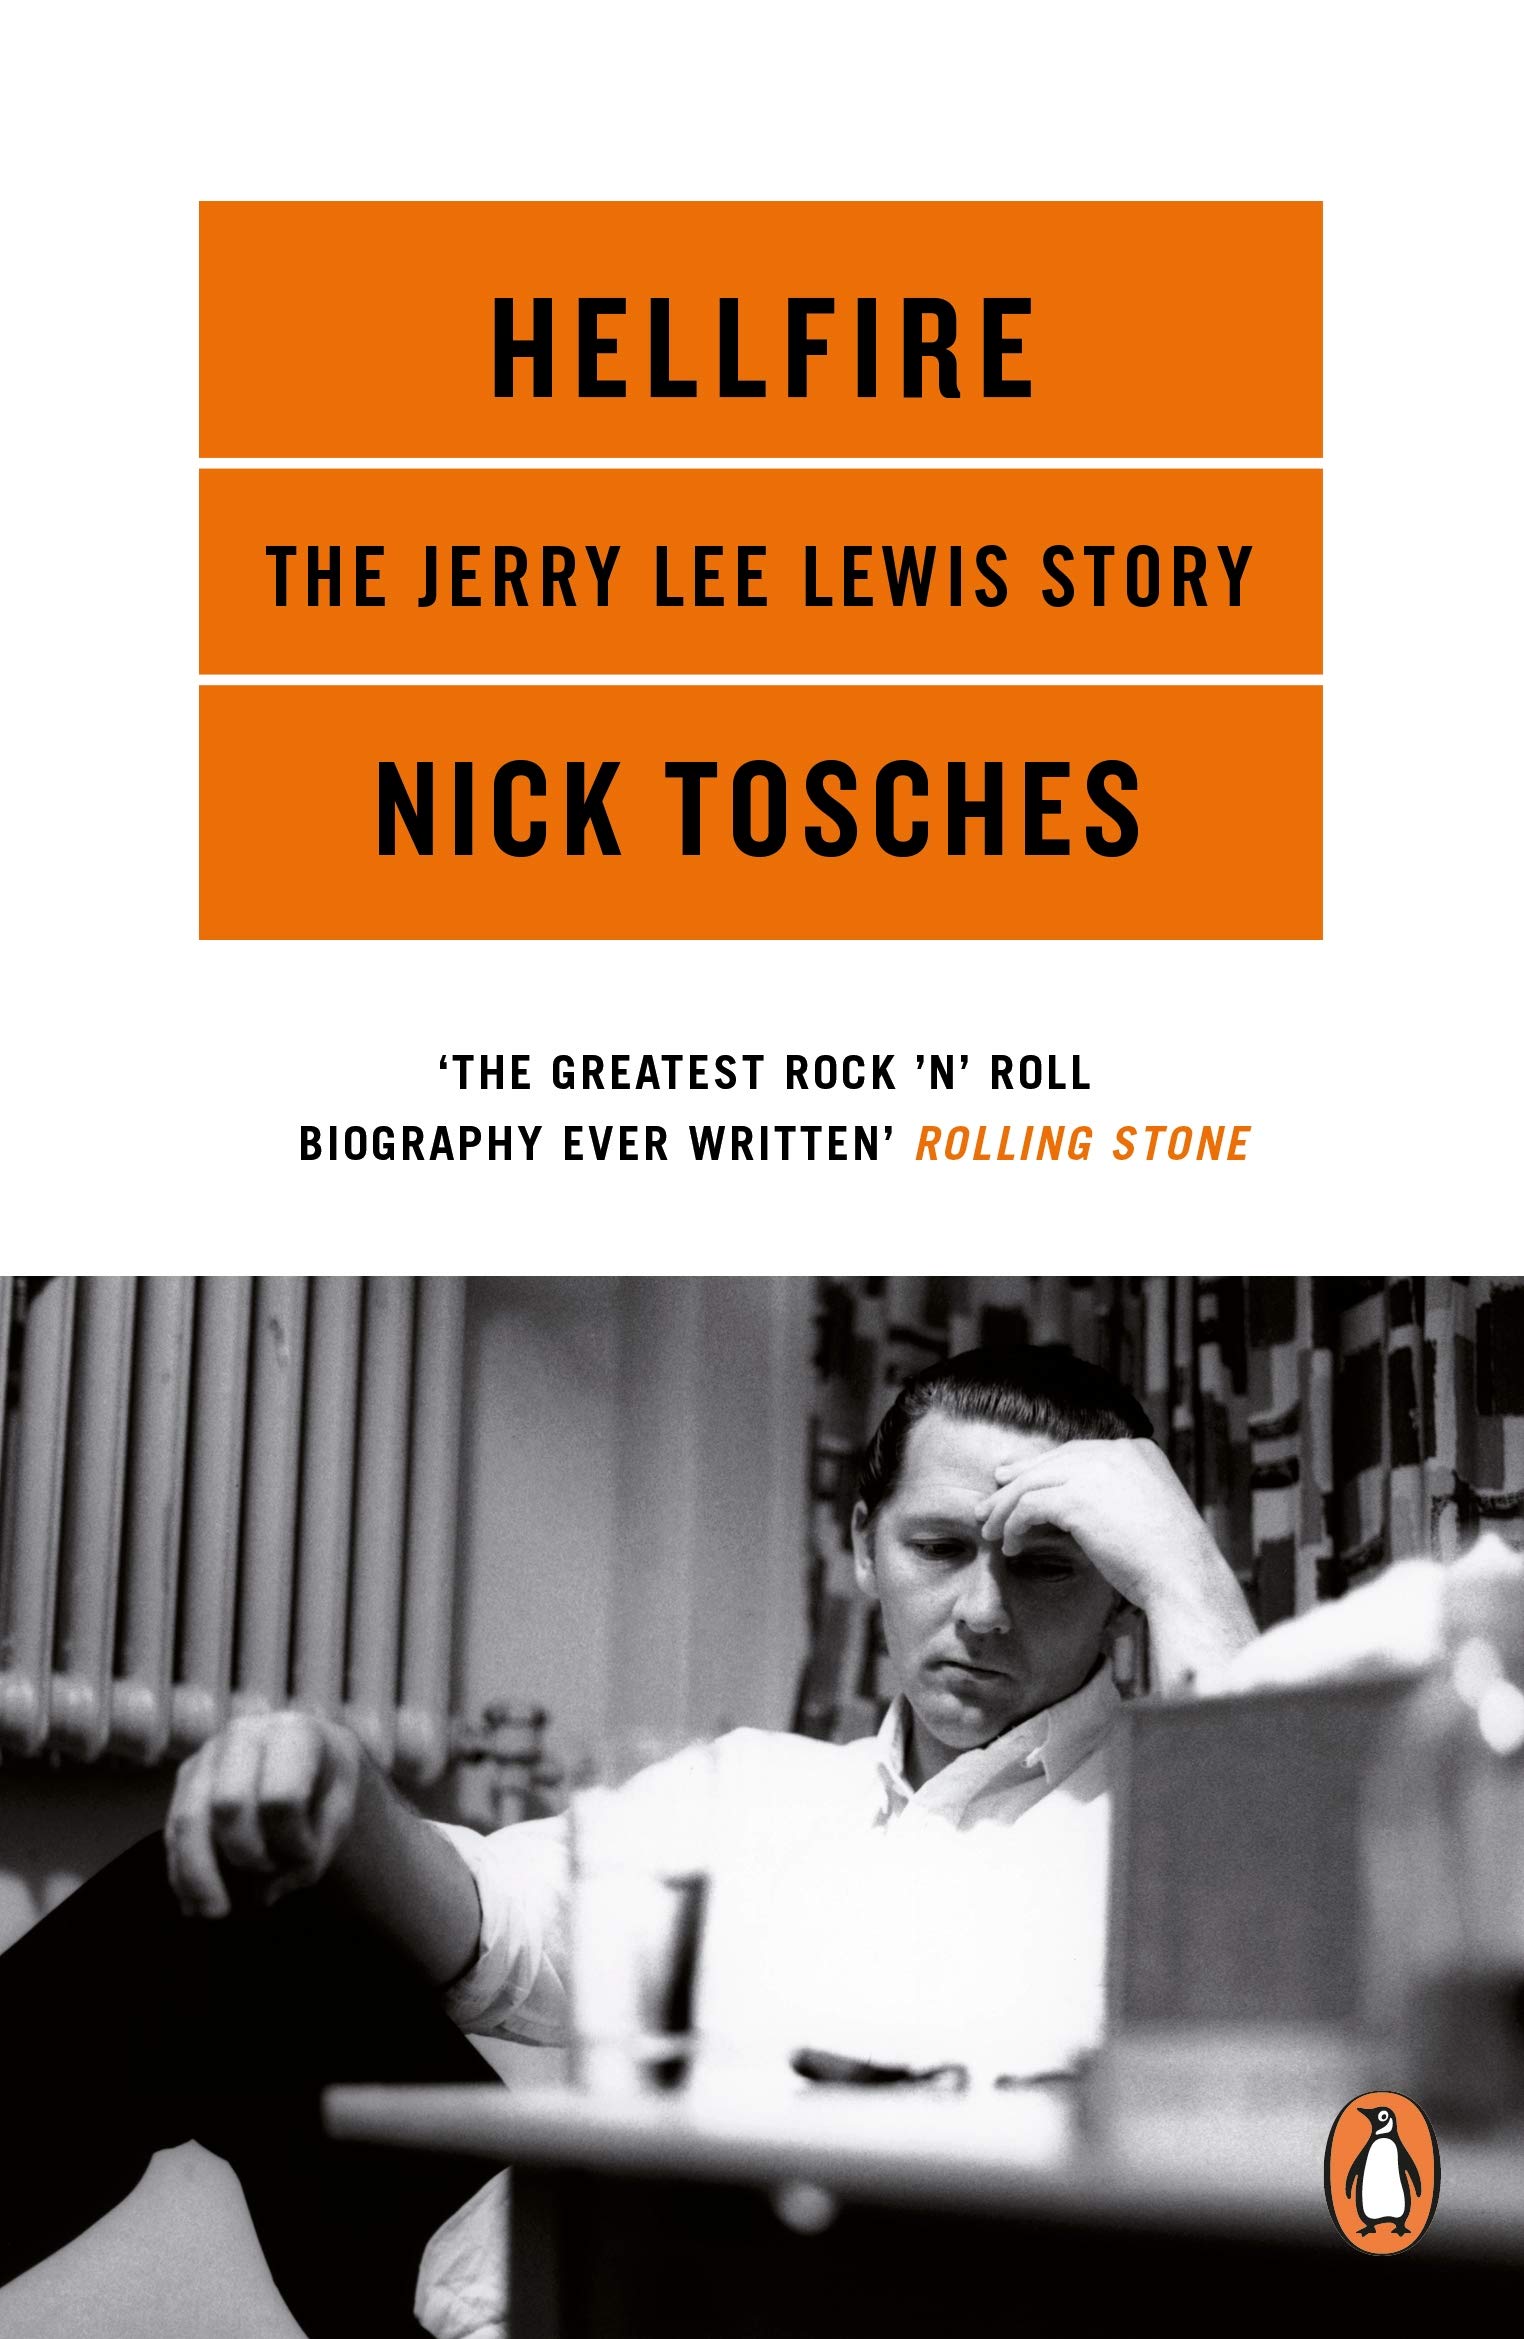 Hellfire: The Jerry Lee Lewis Story - Nick Tosches